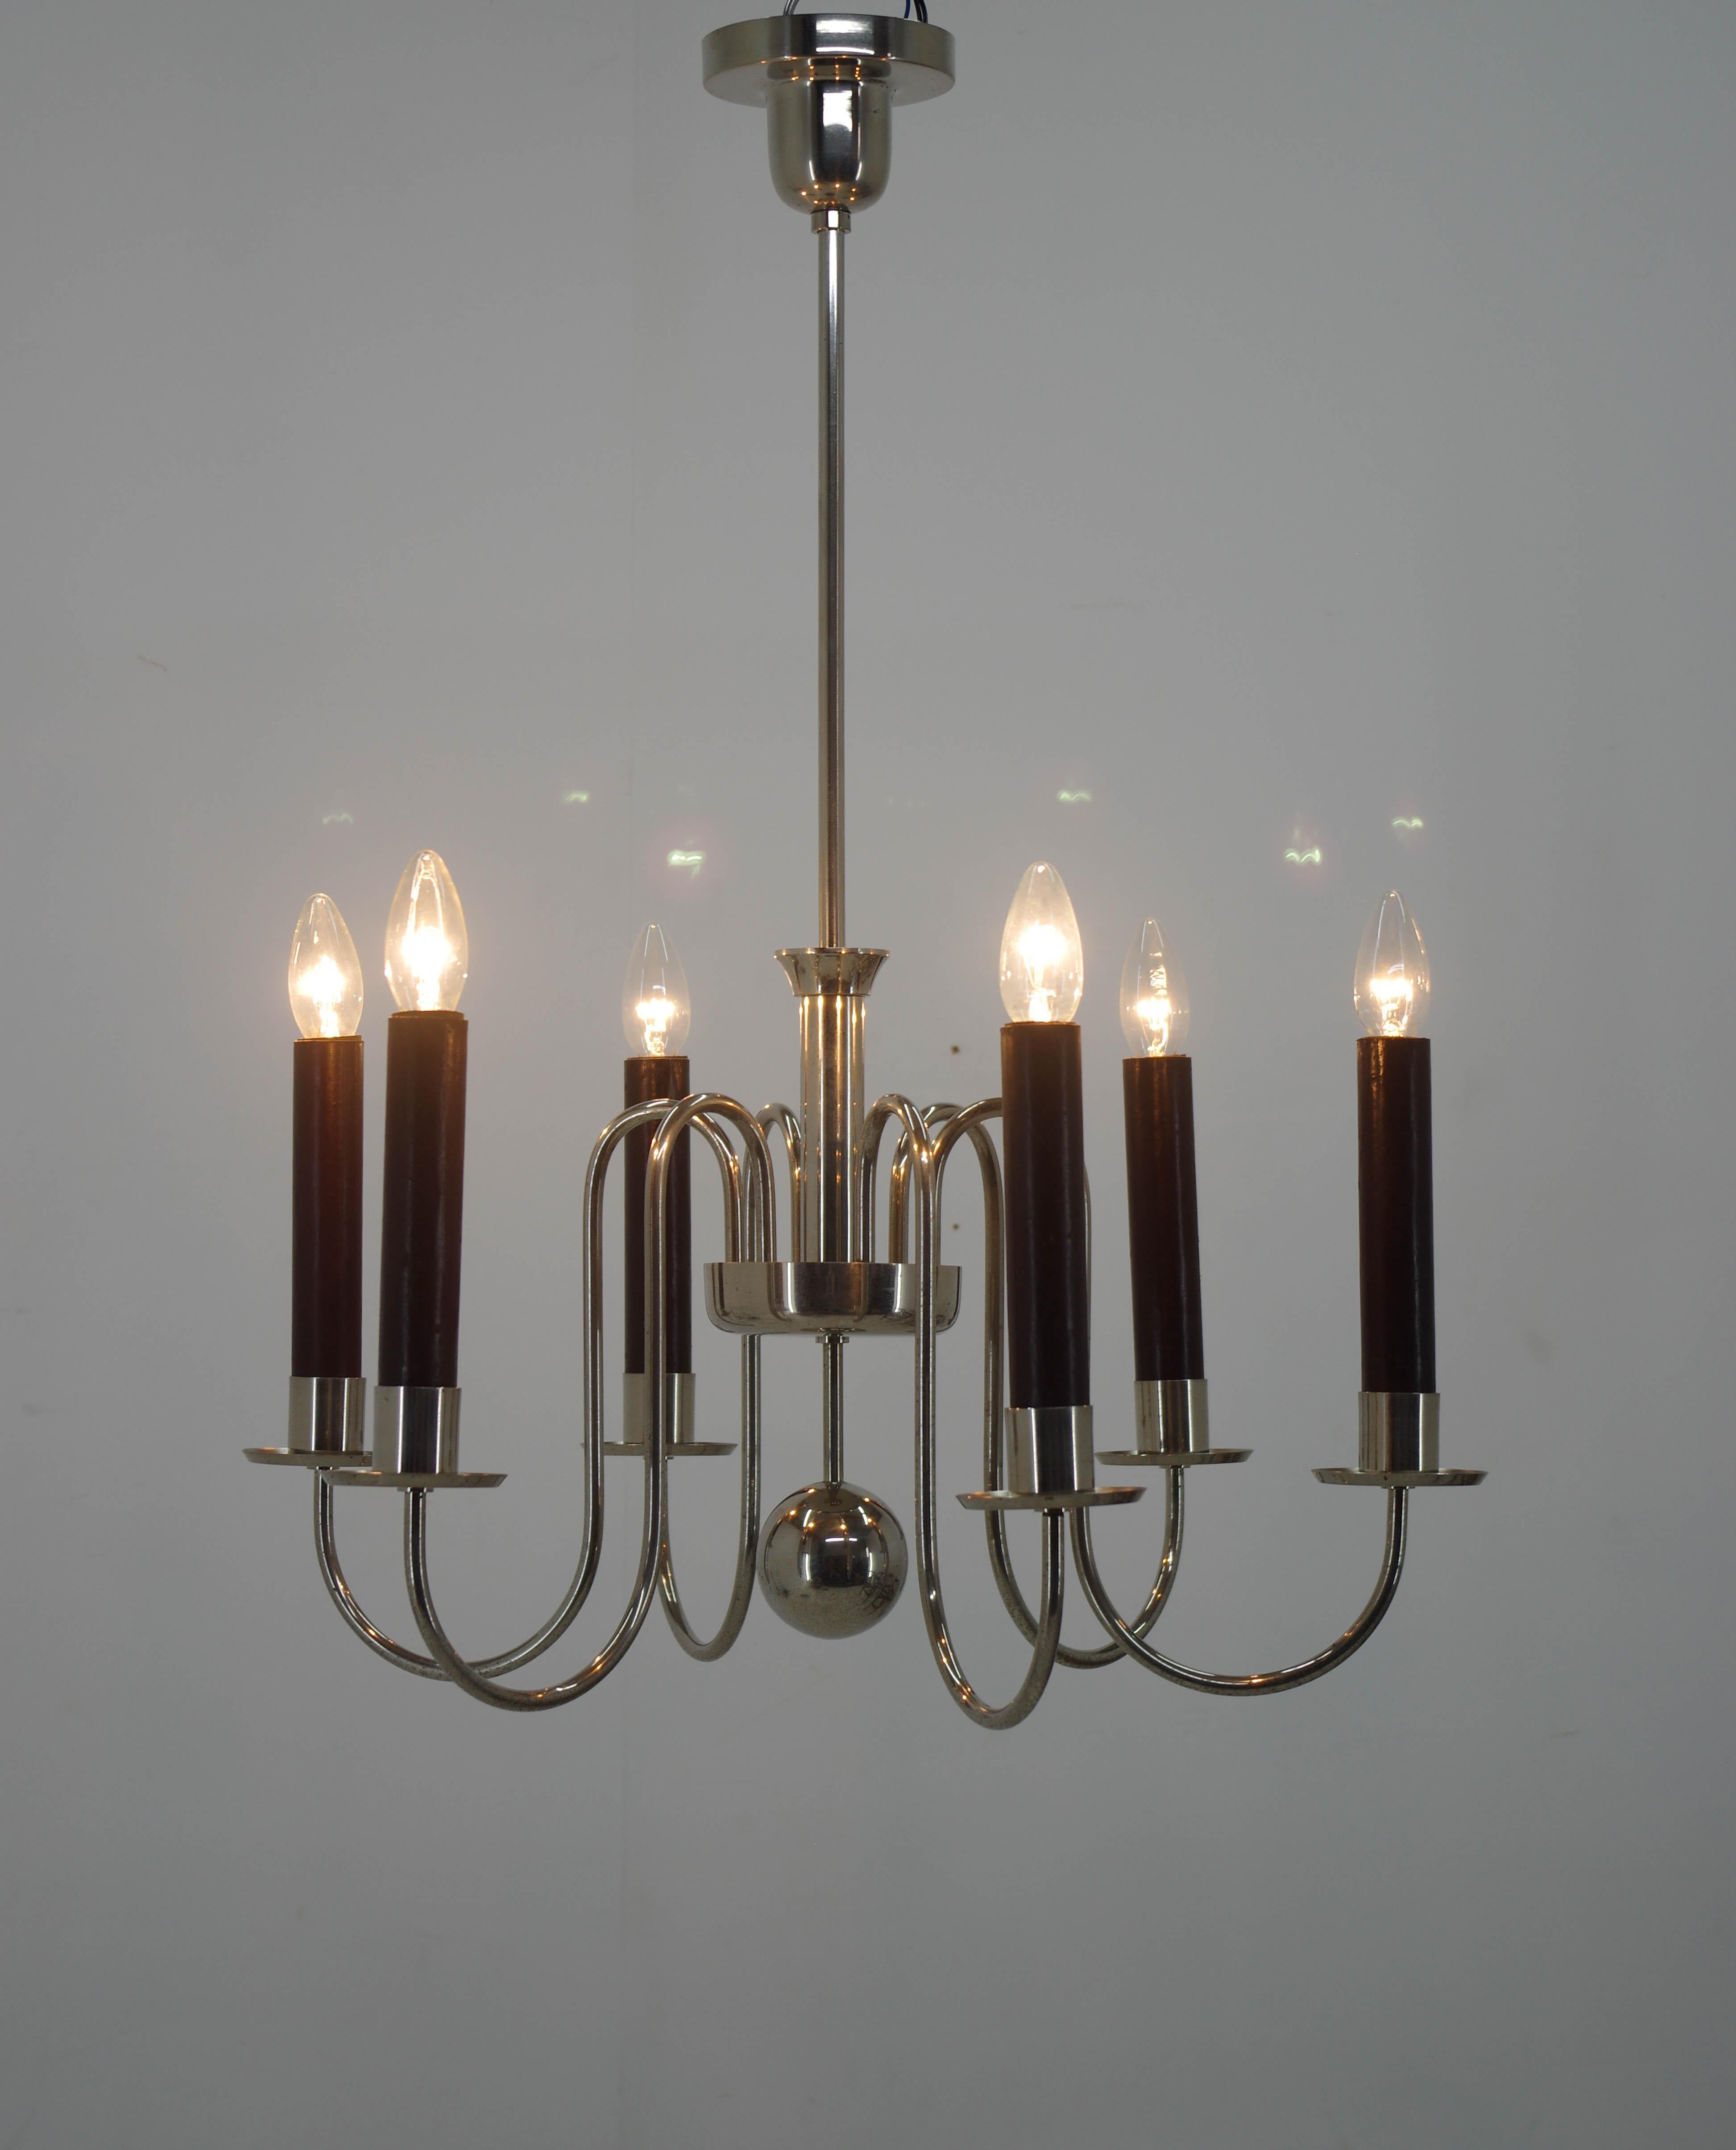 Large Art Nouveau / Art Deco chandelier made in circa 1920s.
Restored: cleaned, polished, rewired:
two separate circuits 3+3x40W, E12-E14 bulbs
US wiring compatible